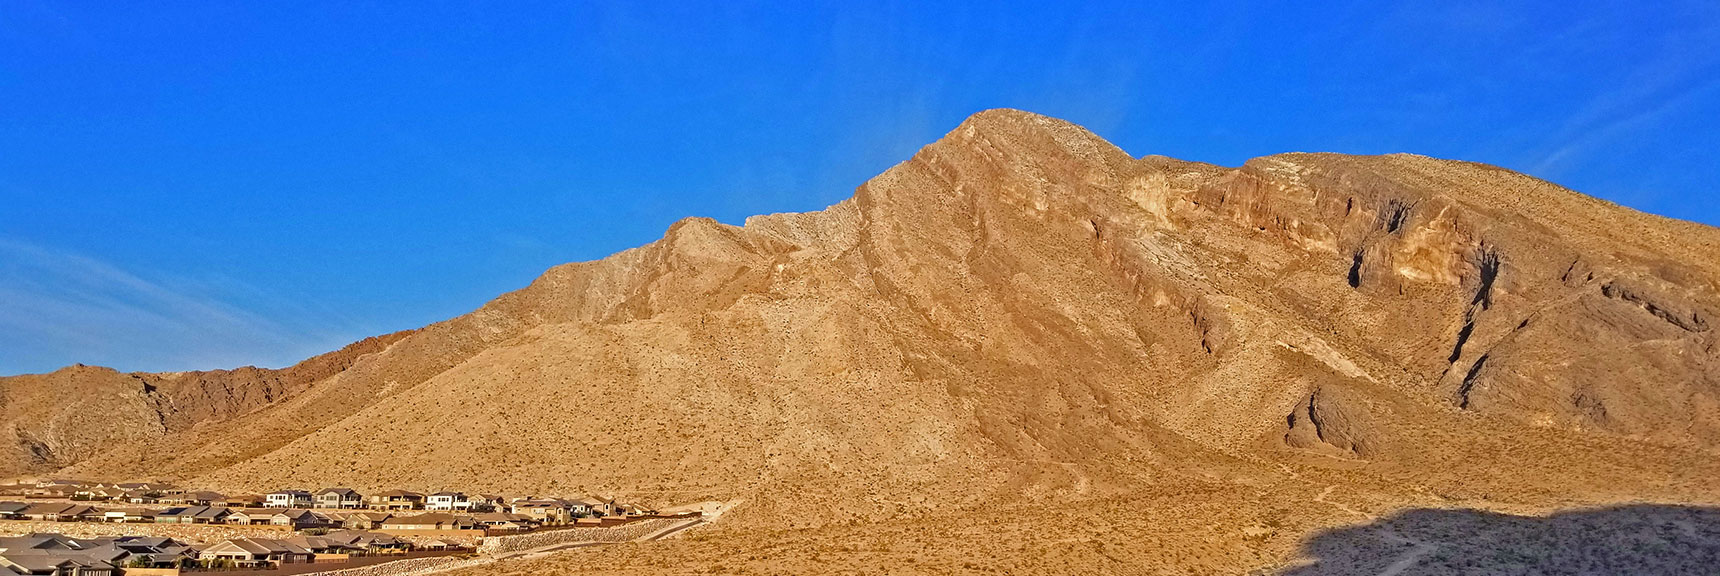 Summerlin Ridge Summit. Next 10 Images Will Reveal Potential Summit Approaches. | Cheyenne Mountain | Las Vegas, Nevada